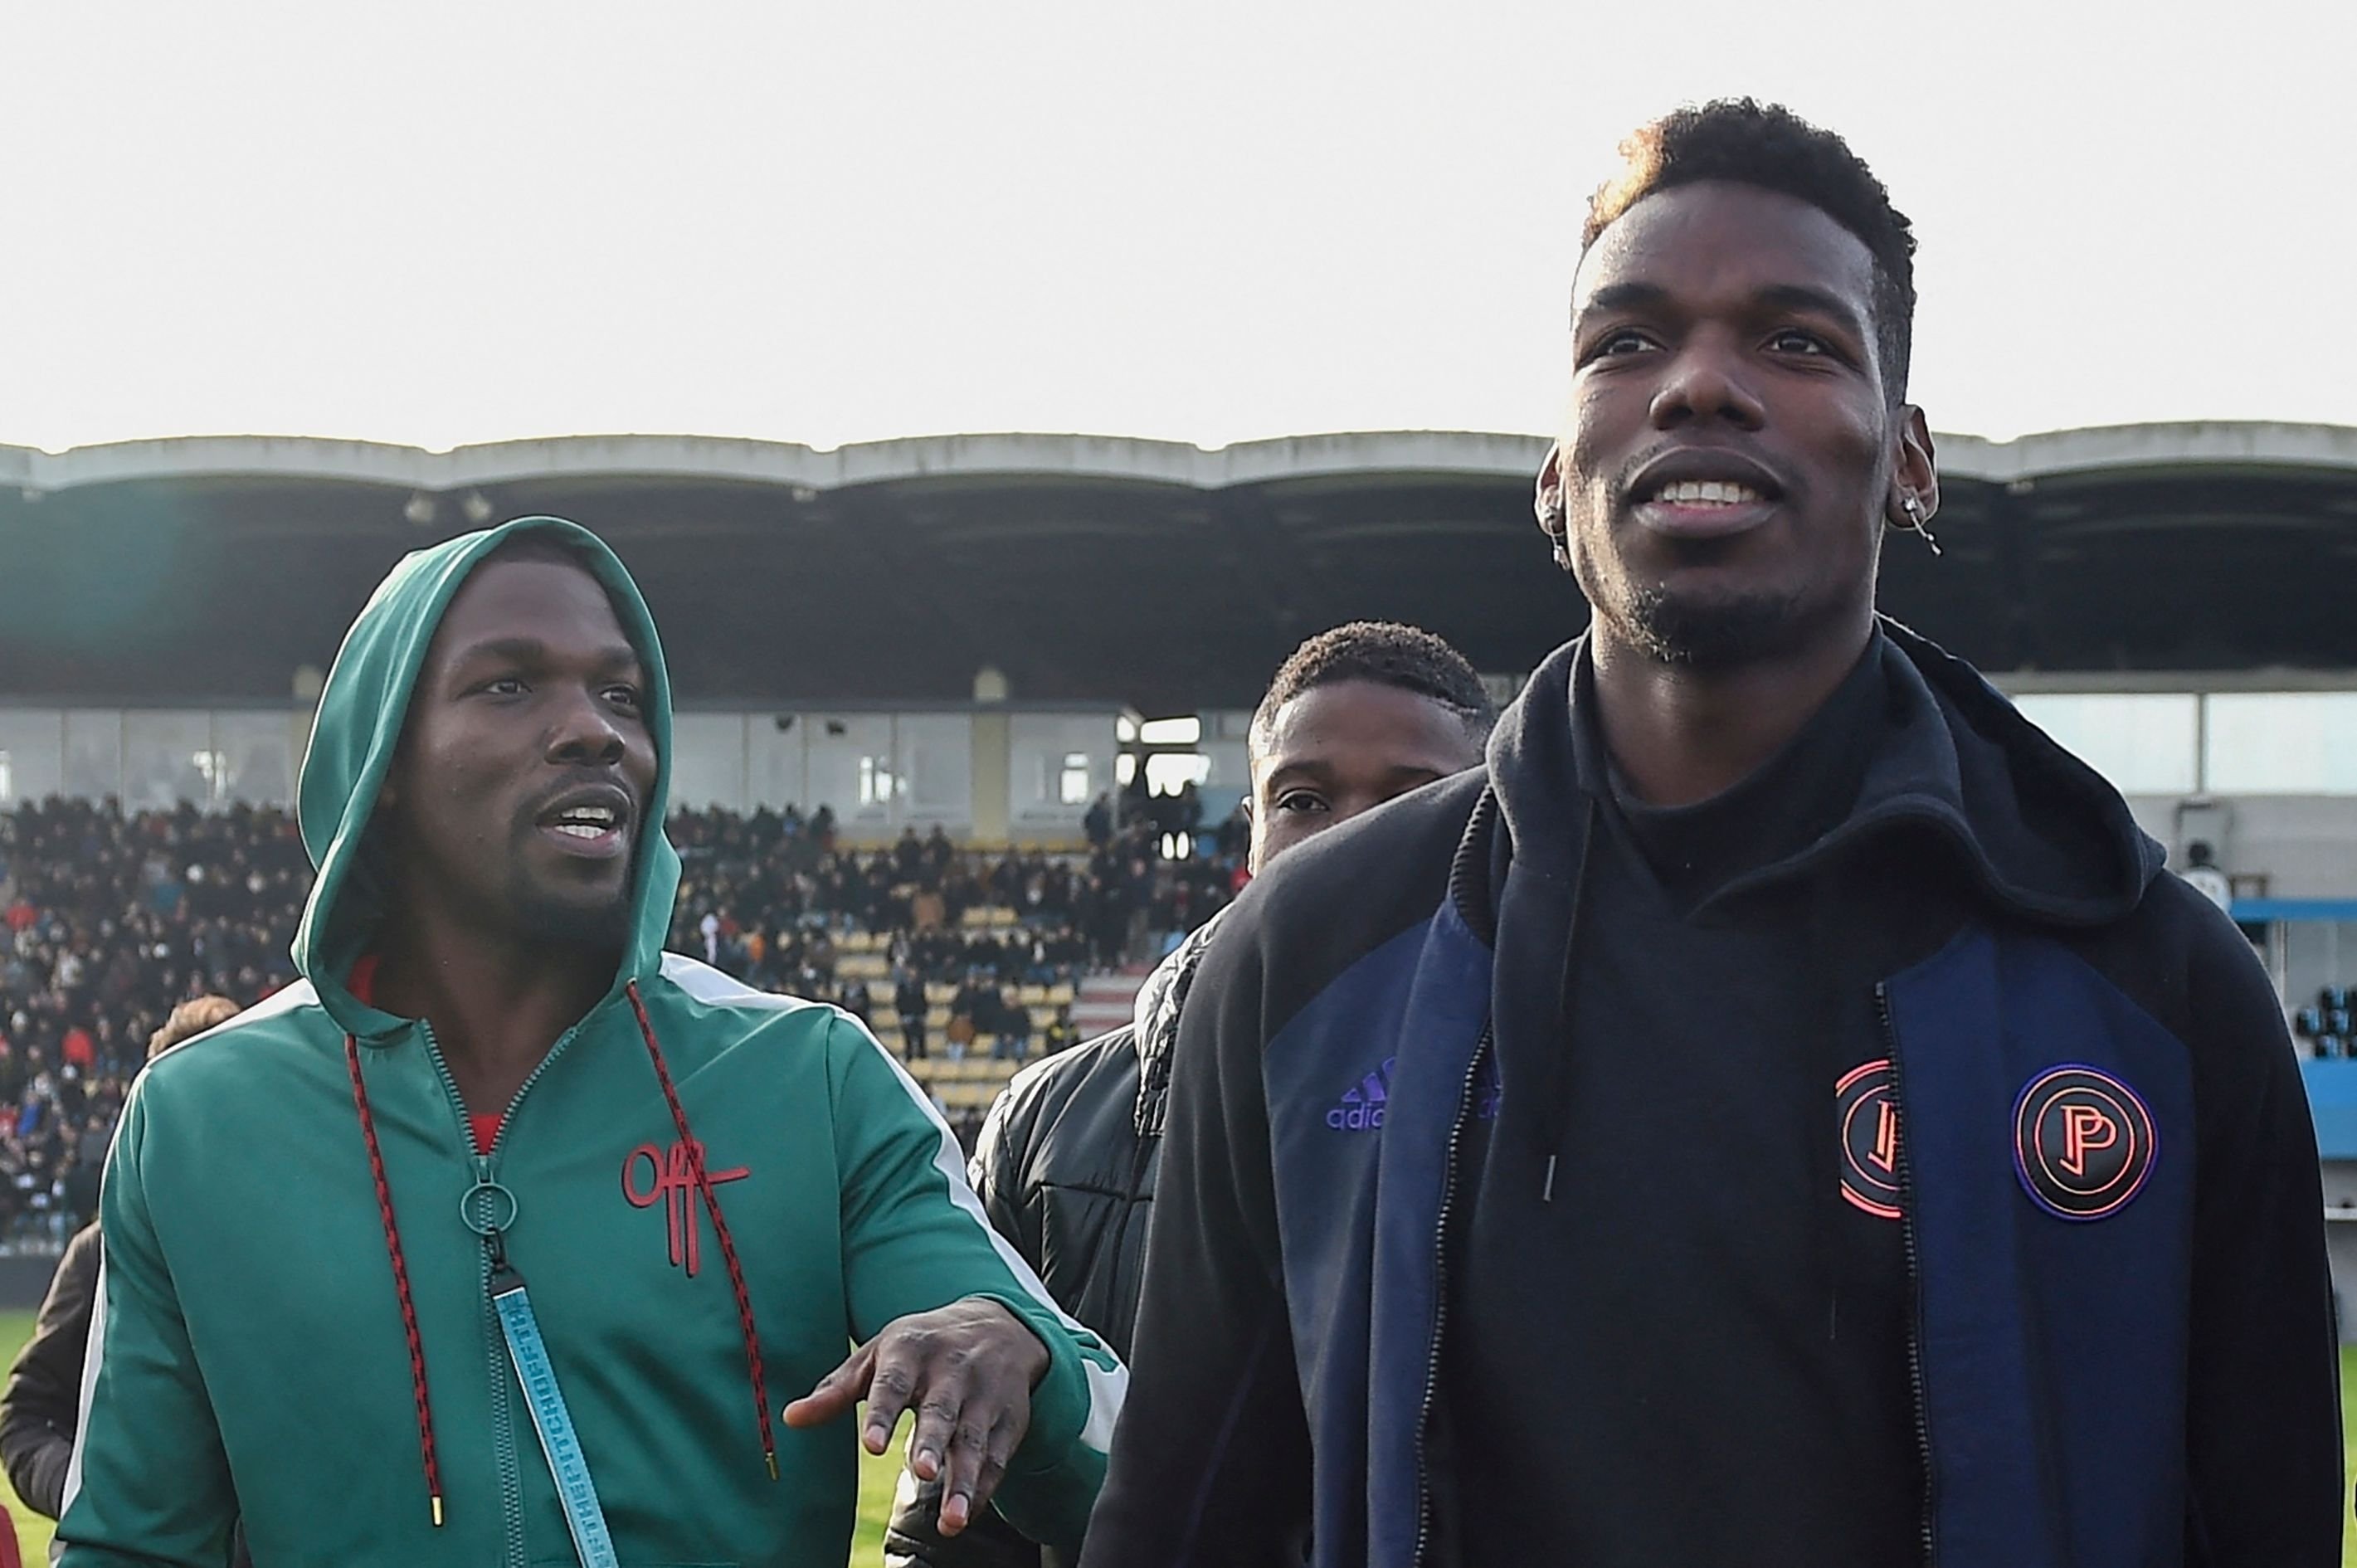 This file photo shows France national team player Paul Pogba (R) and his brother Mathias Pogba (L) walking on the pitch prior to a football match between All Star France and Guinea at the Vallee du Cher Stadium in Tours, central France, as part of the &quot;48h for Guinea&quot; charity event, Dec. 29, 2019. (Photo by GUILLAUME SOUVANT / AFP)